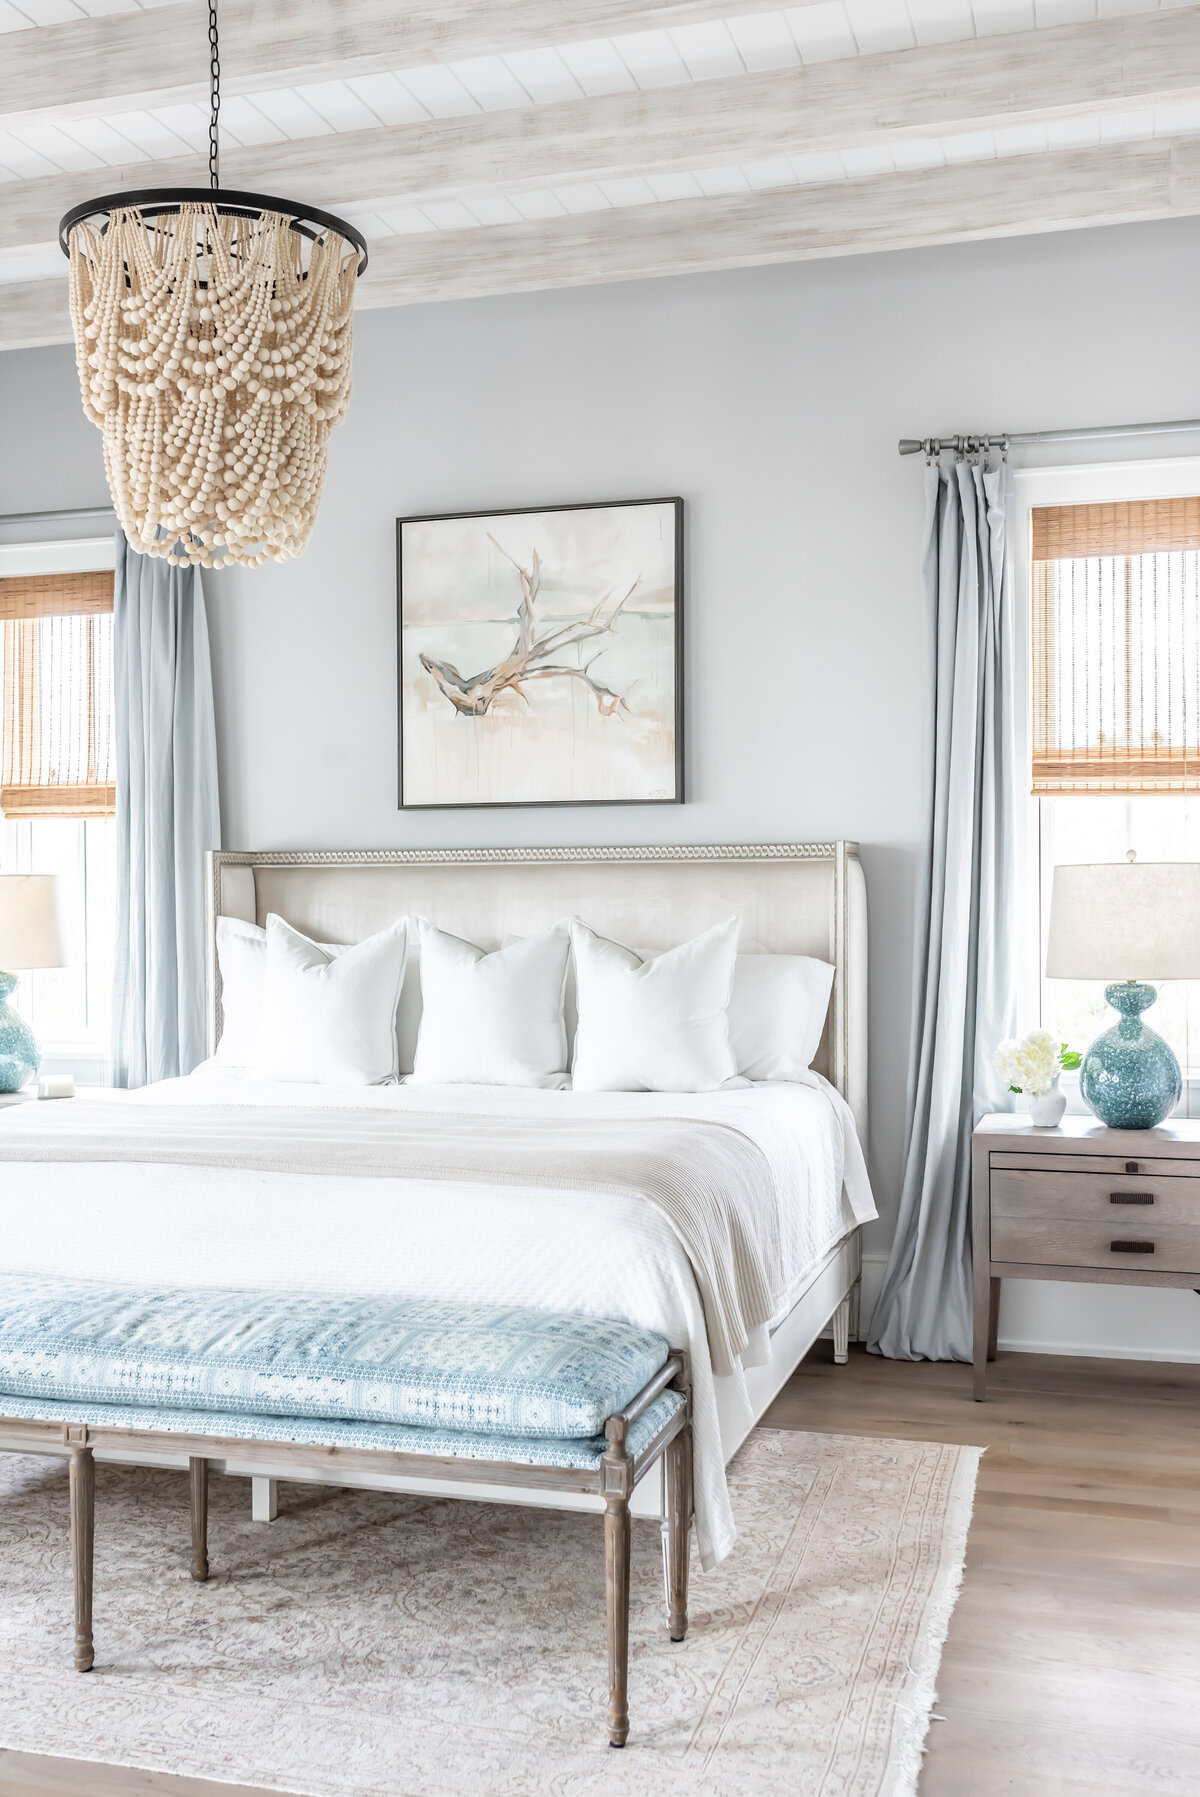 ADC-May1-2019-Master-Bedroom-12